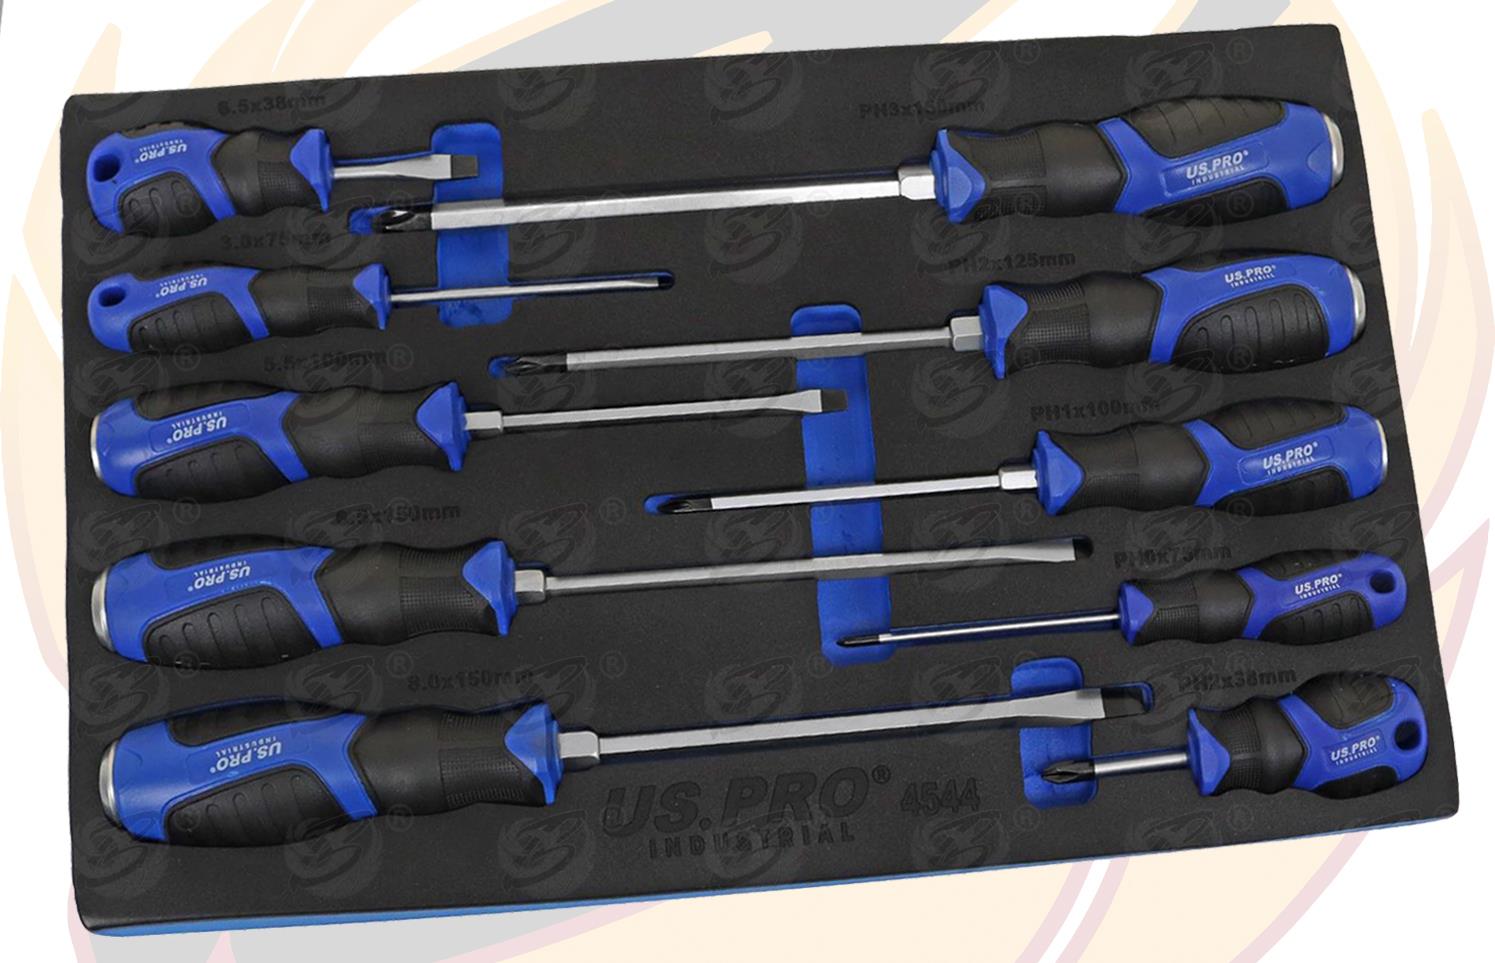 US PRO INDUSTRIAL 10PCS MAGNETIC GO THROUGH SCREWDRIVER SET ( SLOTTED - PHILLIPS )